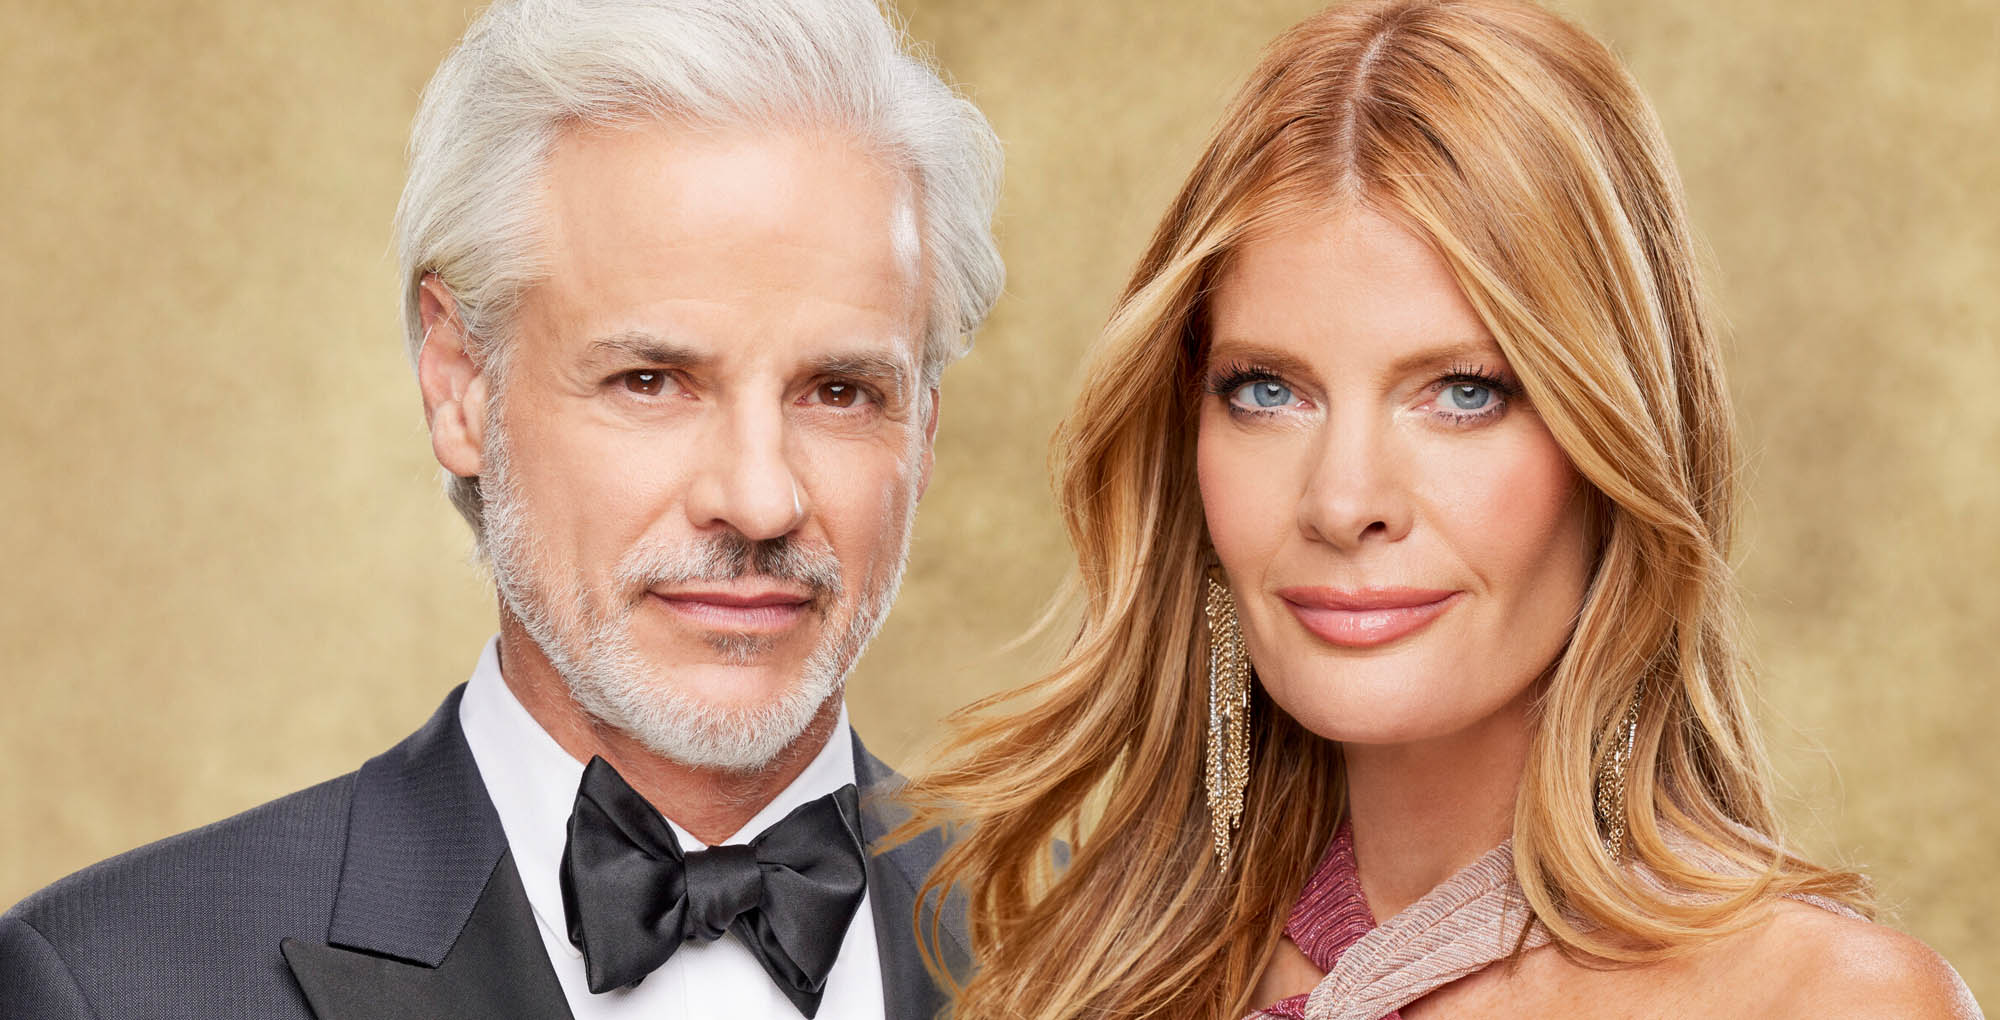 christian le blanc and michelle stafford from the young and the restless against a gold background.